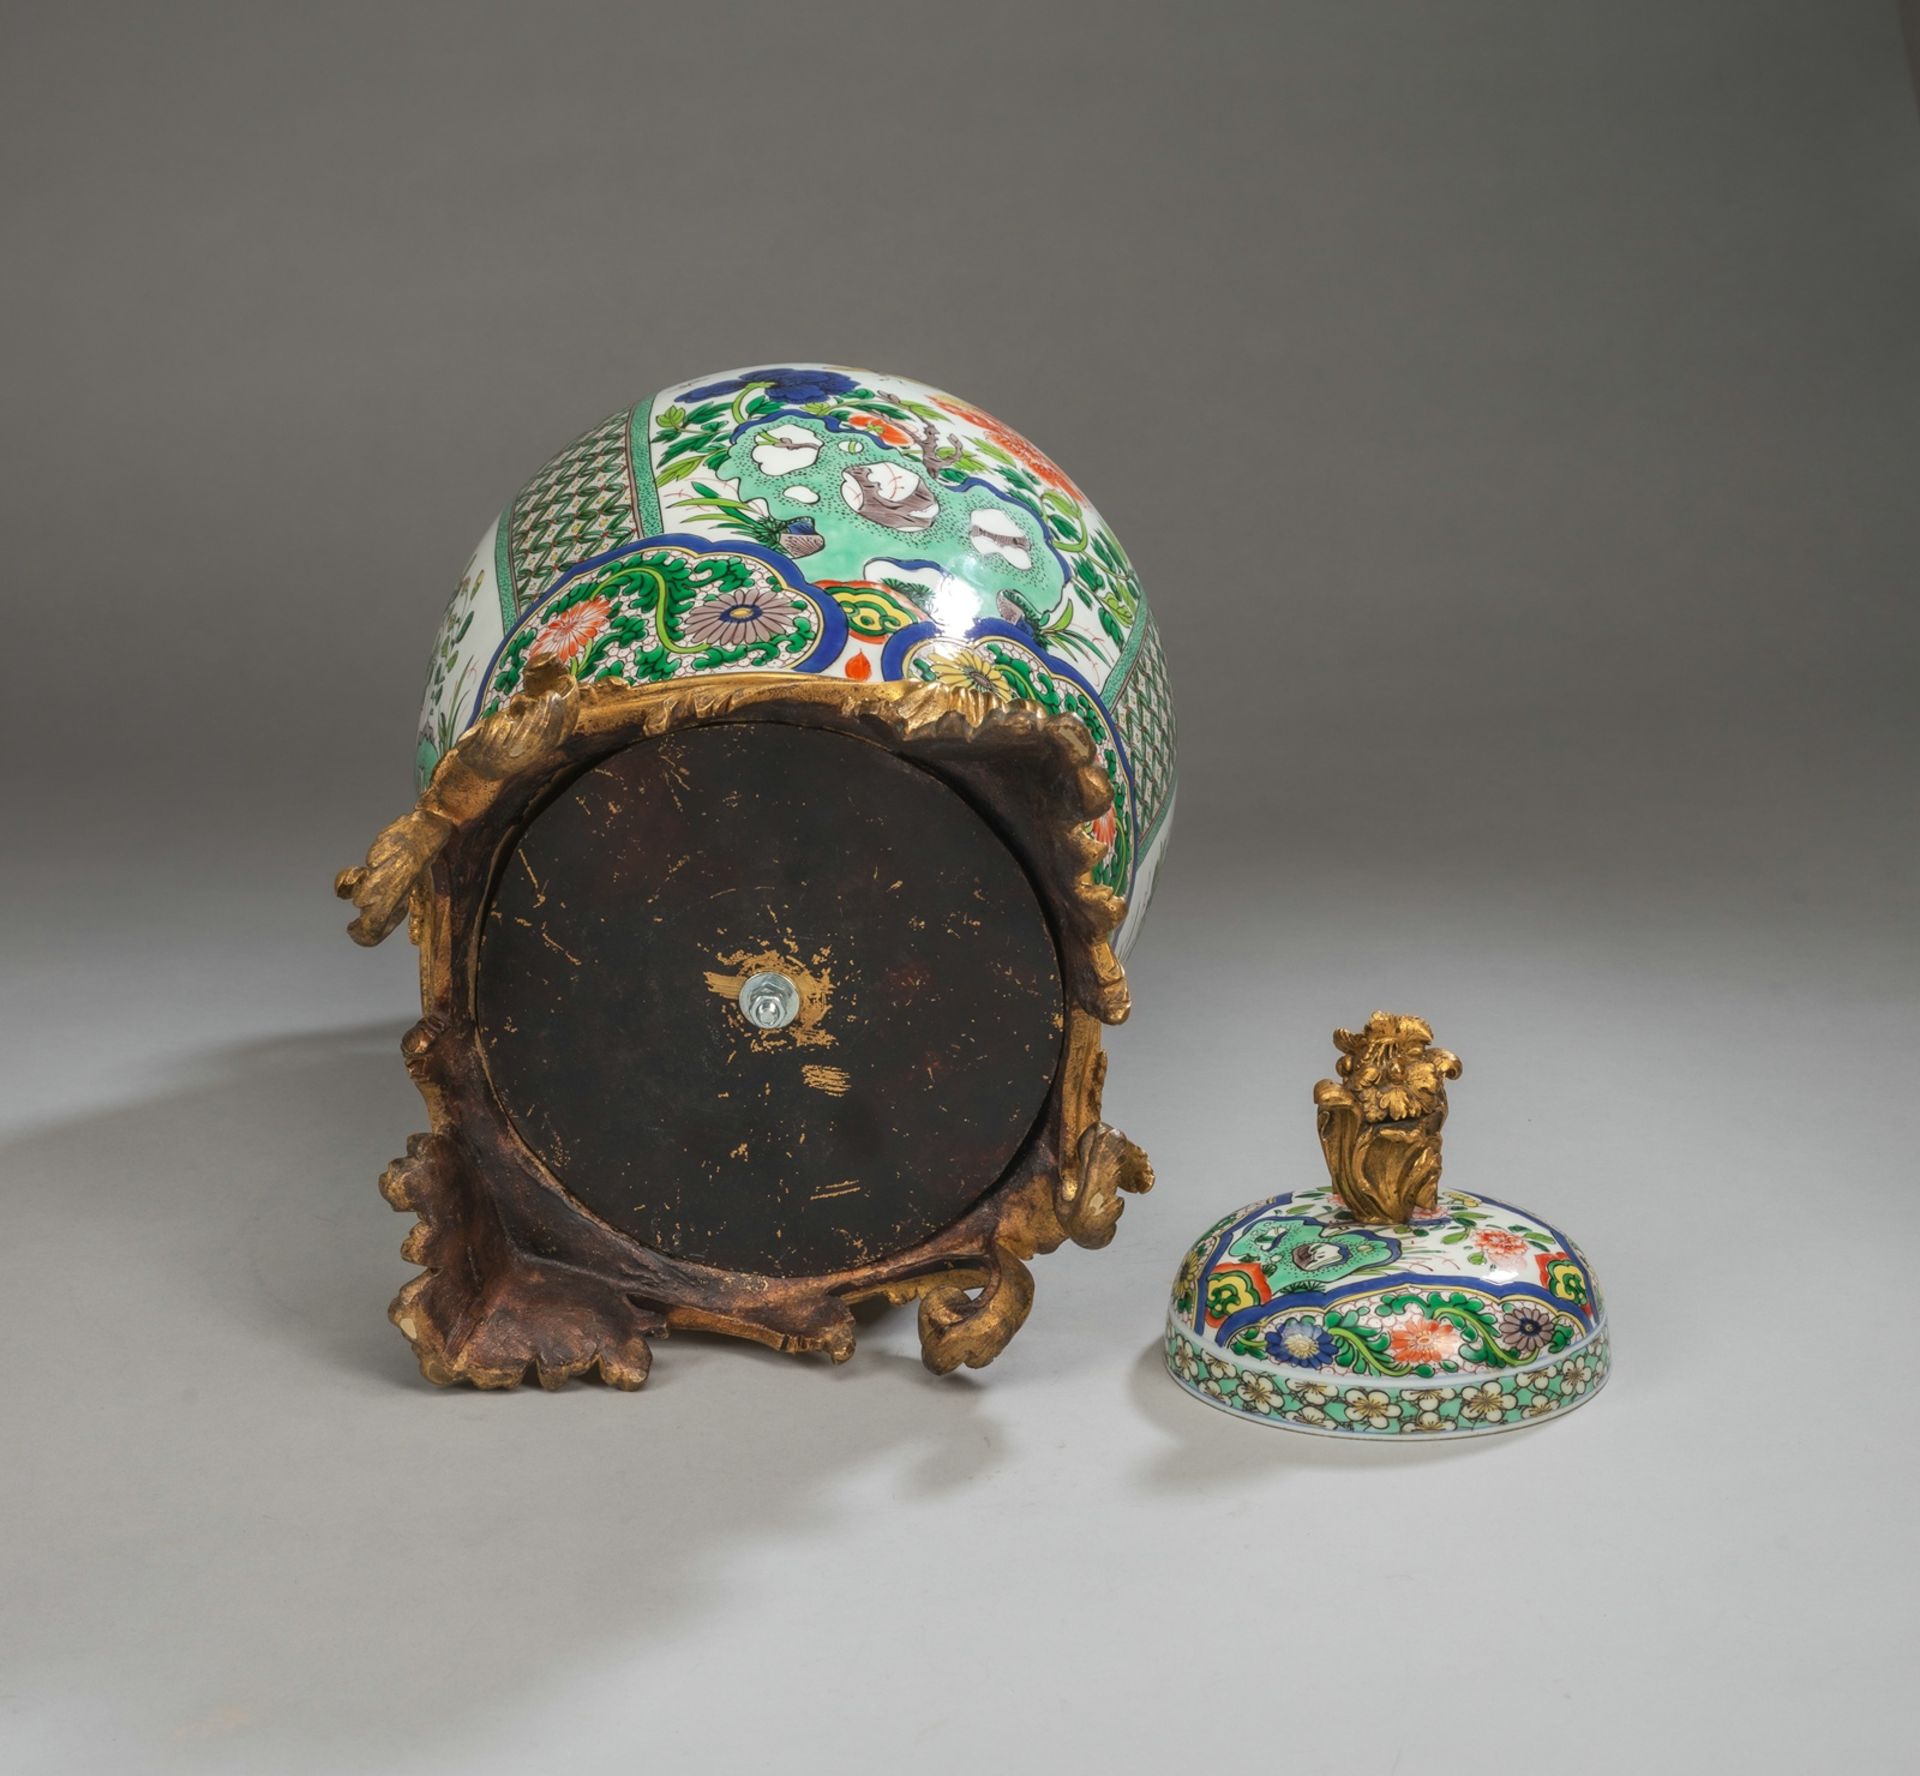 A LARGE CHINOISERIE STYLE ORMOLU MOUNTED PORCELAIN VASE AND COVER - Image 4 of 4